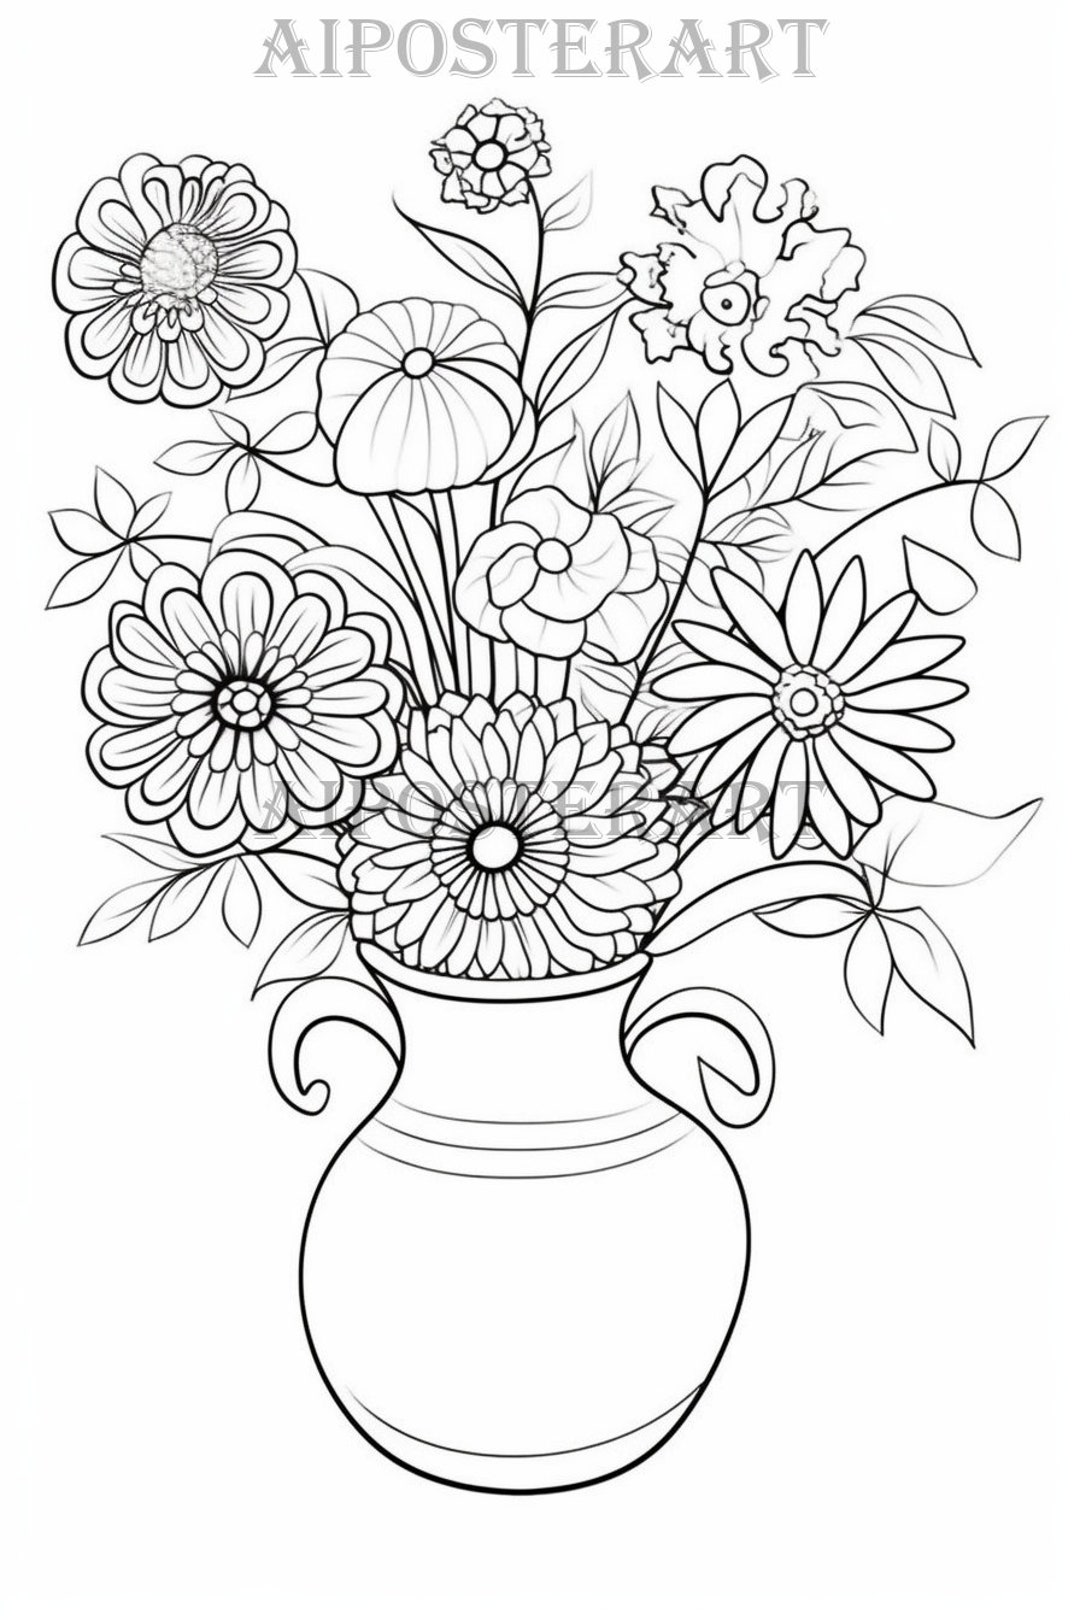 Vase of flowers coloring page for kids printable flowers